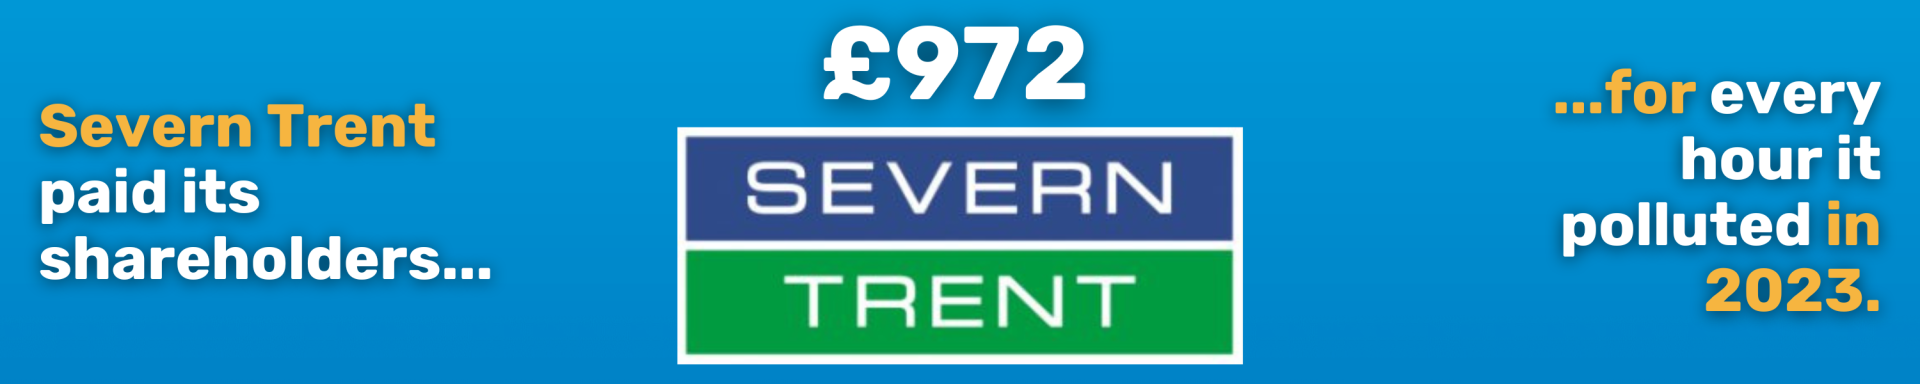 Text reads: "Severn Trent paid its shareholders £972 for every hour it polluted in 2023."